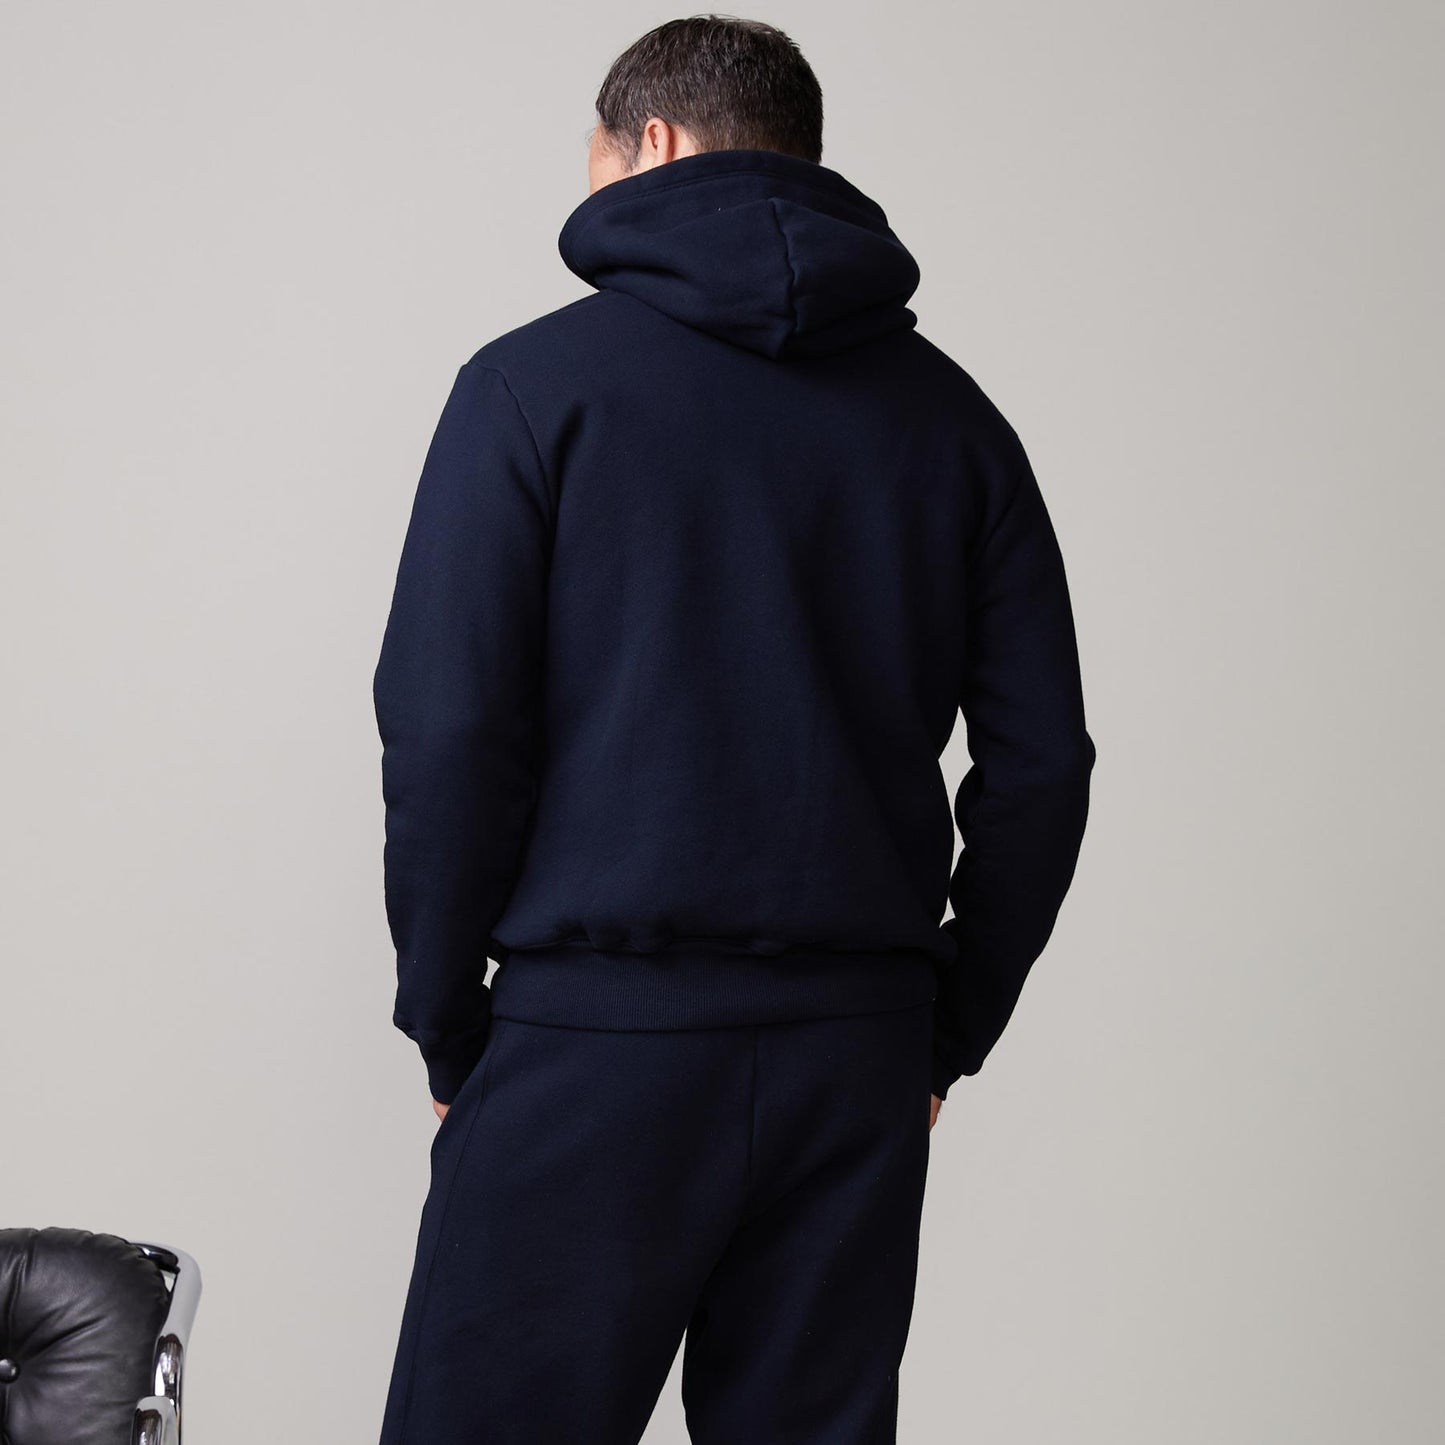 Back view of model wearing the oversized hoody in indigo.